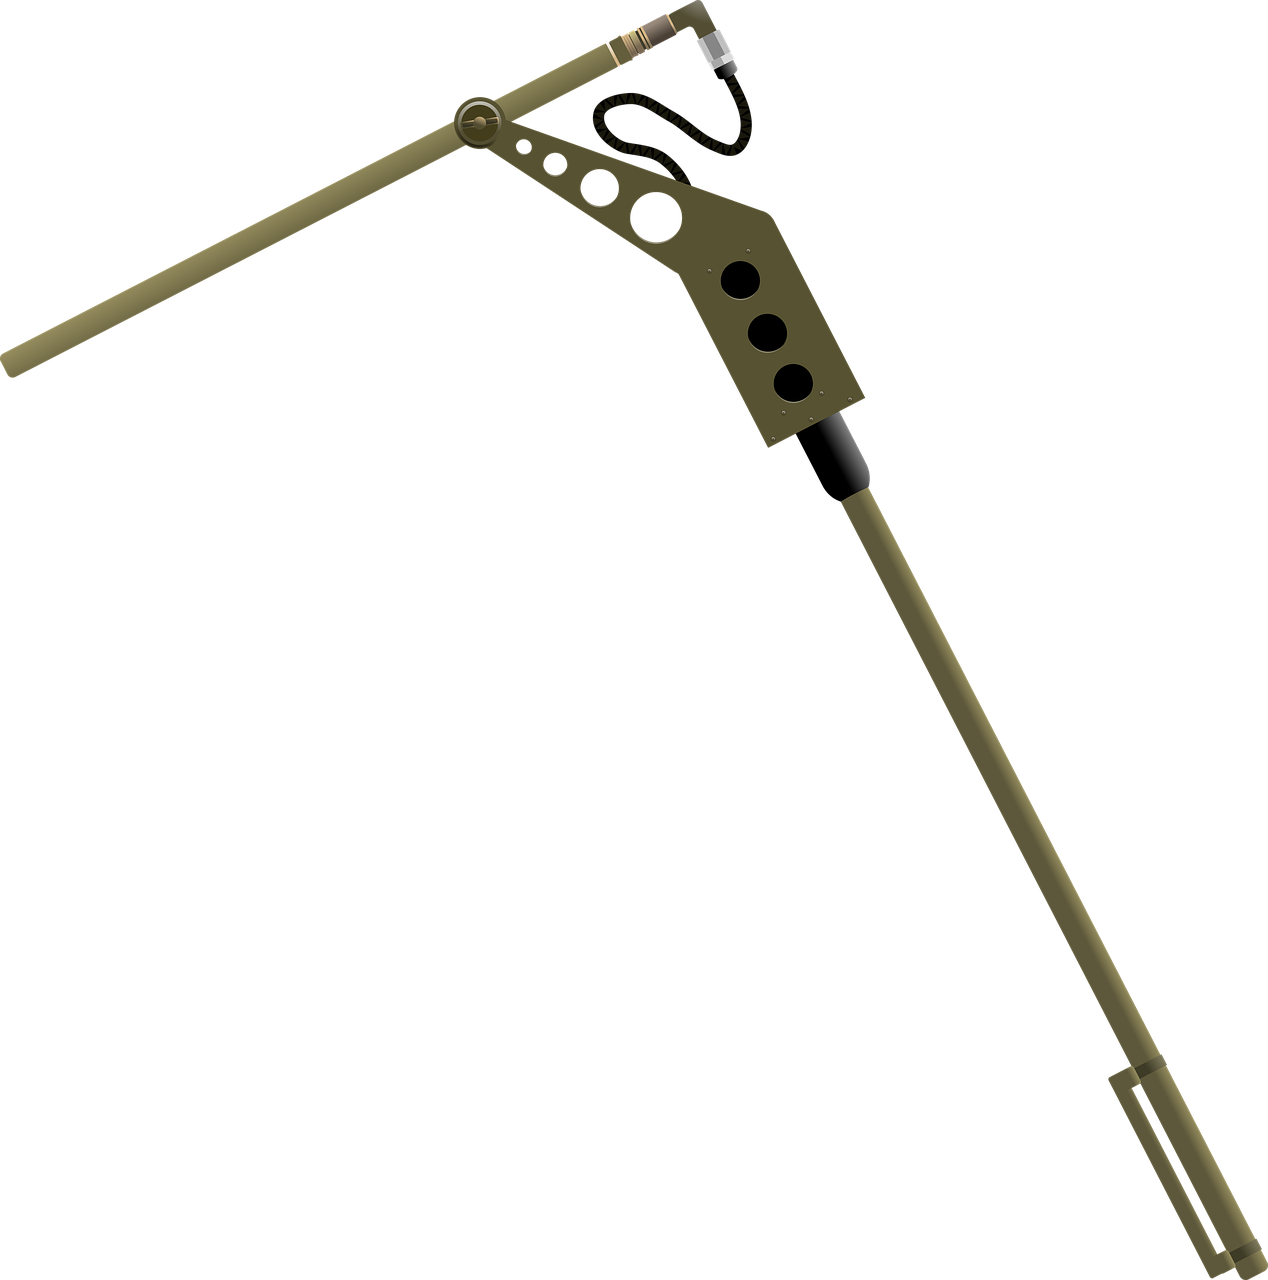 a close up of a weapon on a black background, inspired by Kamisaka Sekka, deviantart, cad design of lawnmower, iv pole, olive, concrete